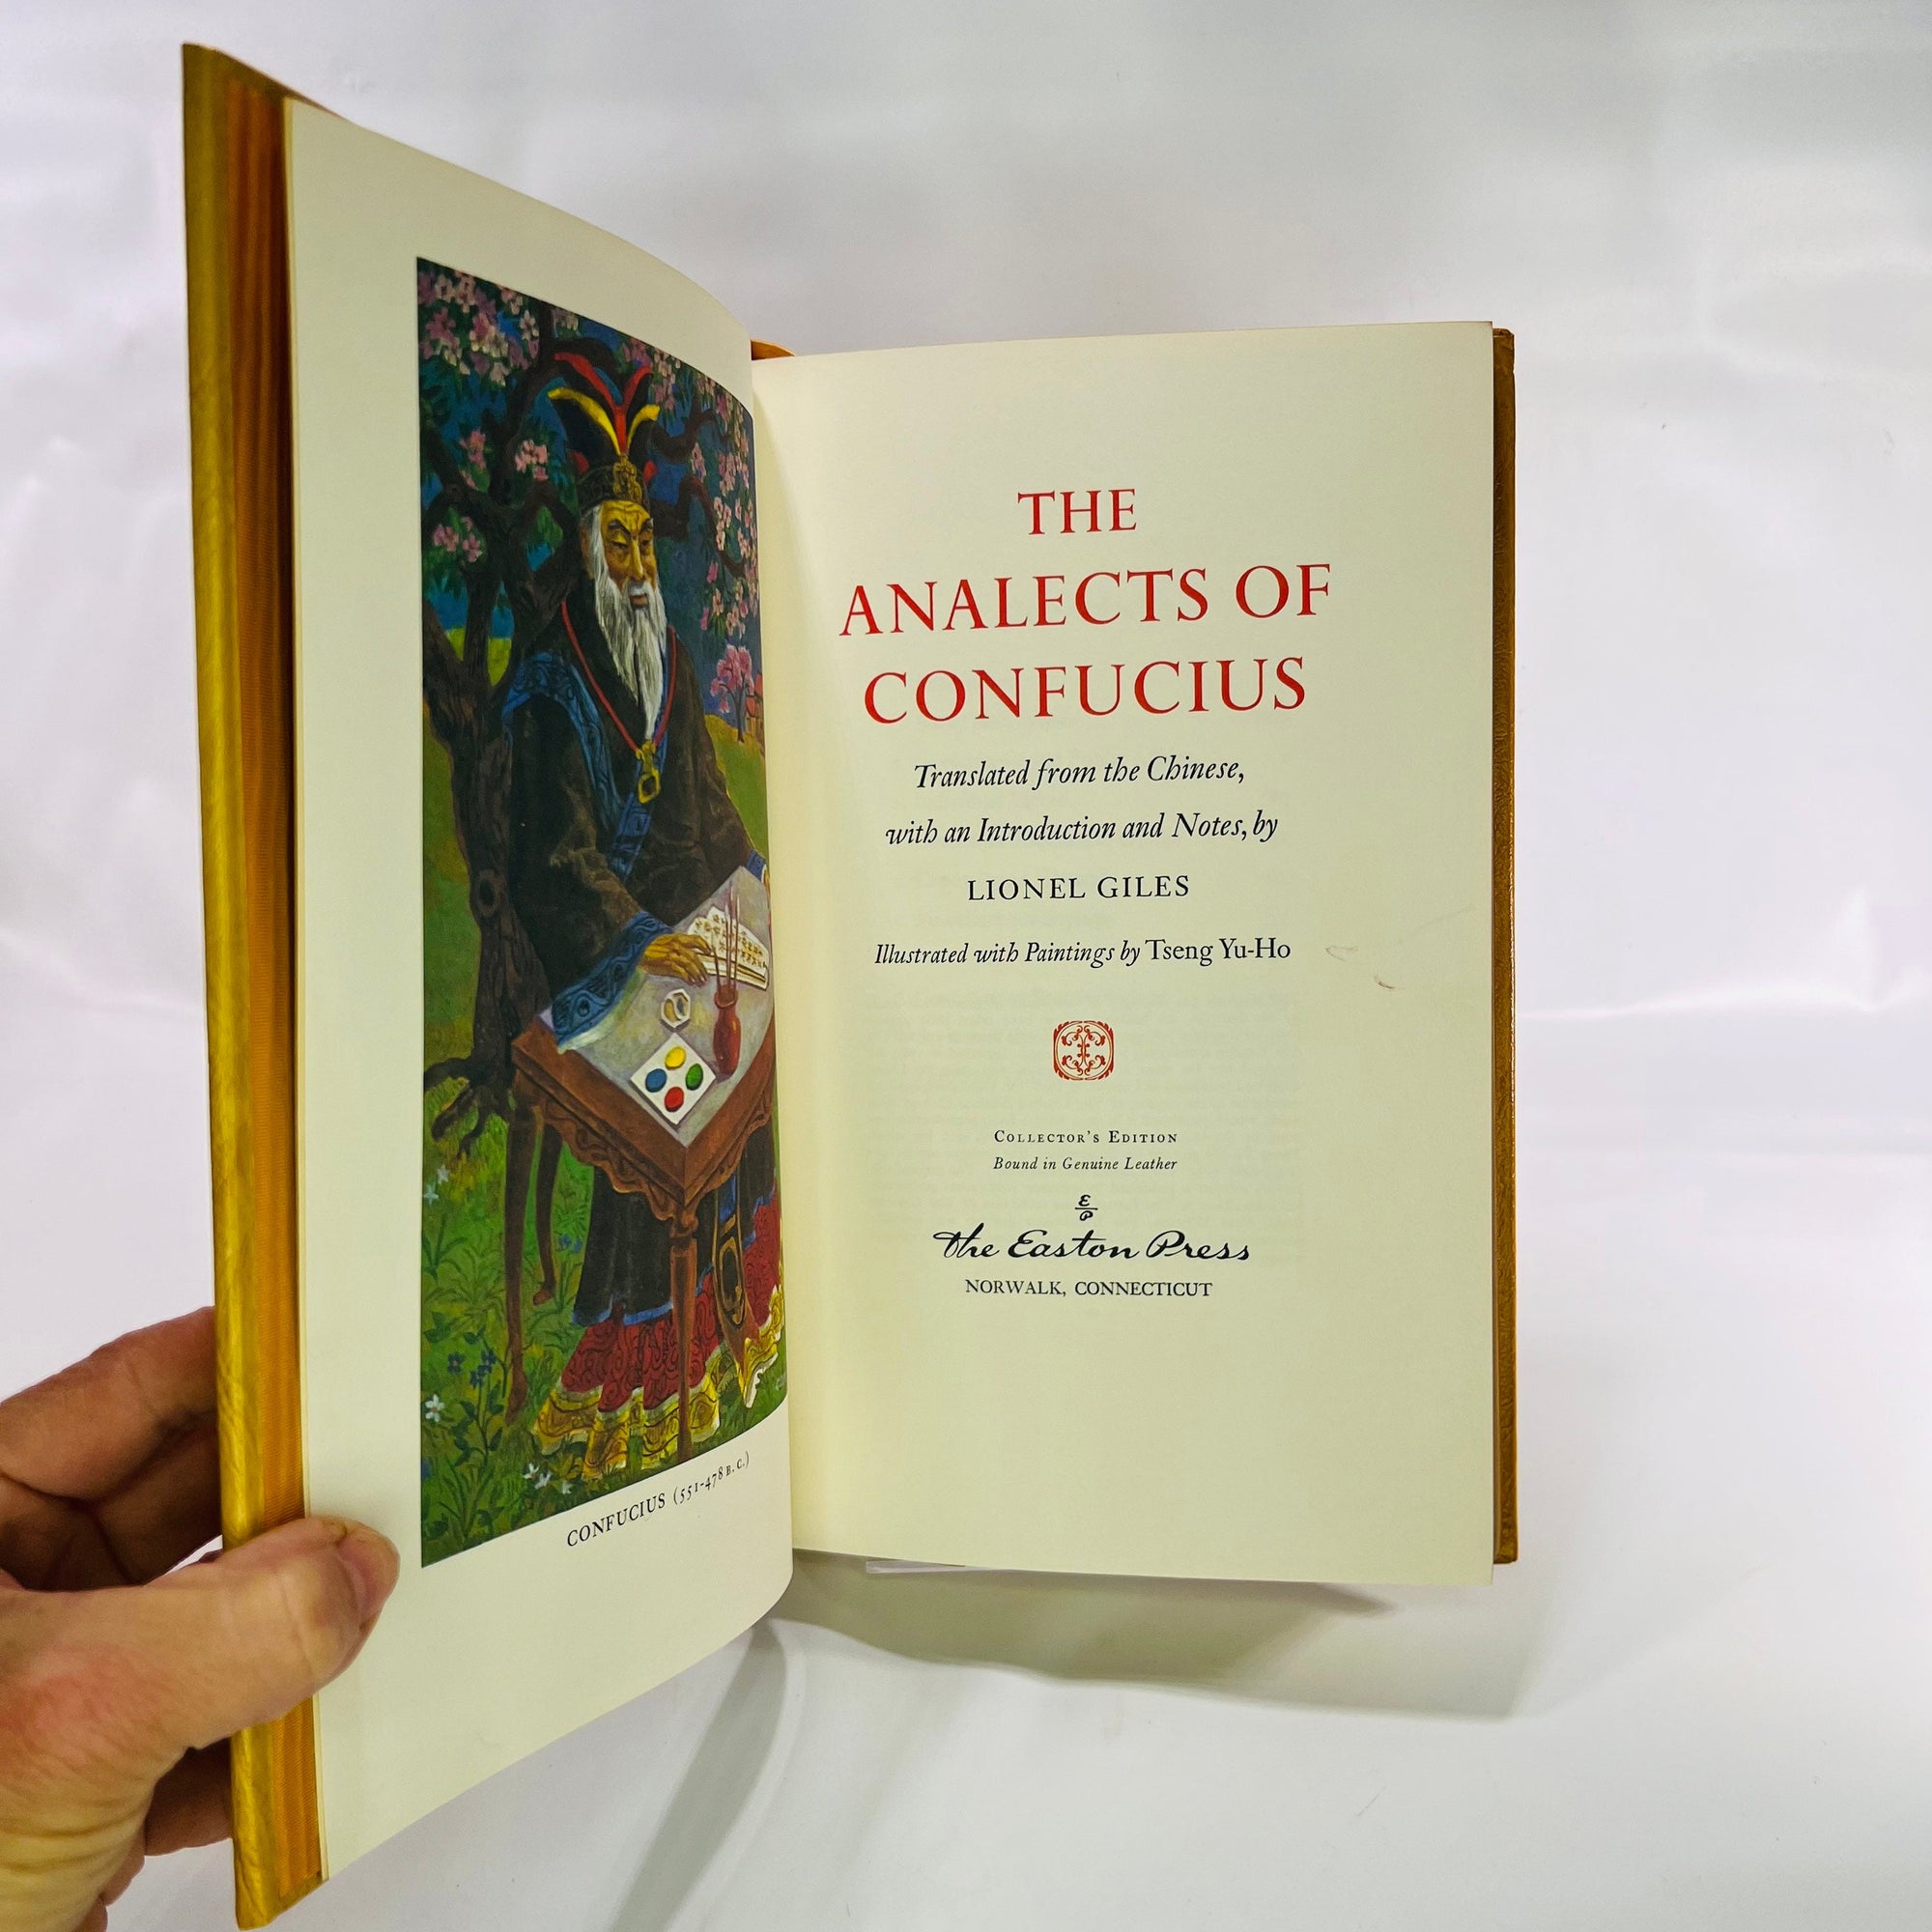 Analects of Confucius translated from the Chinese Illustrated Paintings by Tseng Yu-Ho 1976 Easton Press Leather Bound Book Gold Gilt Pages